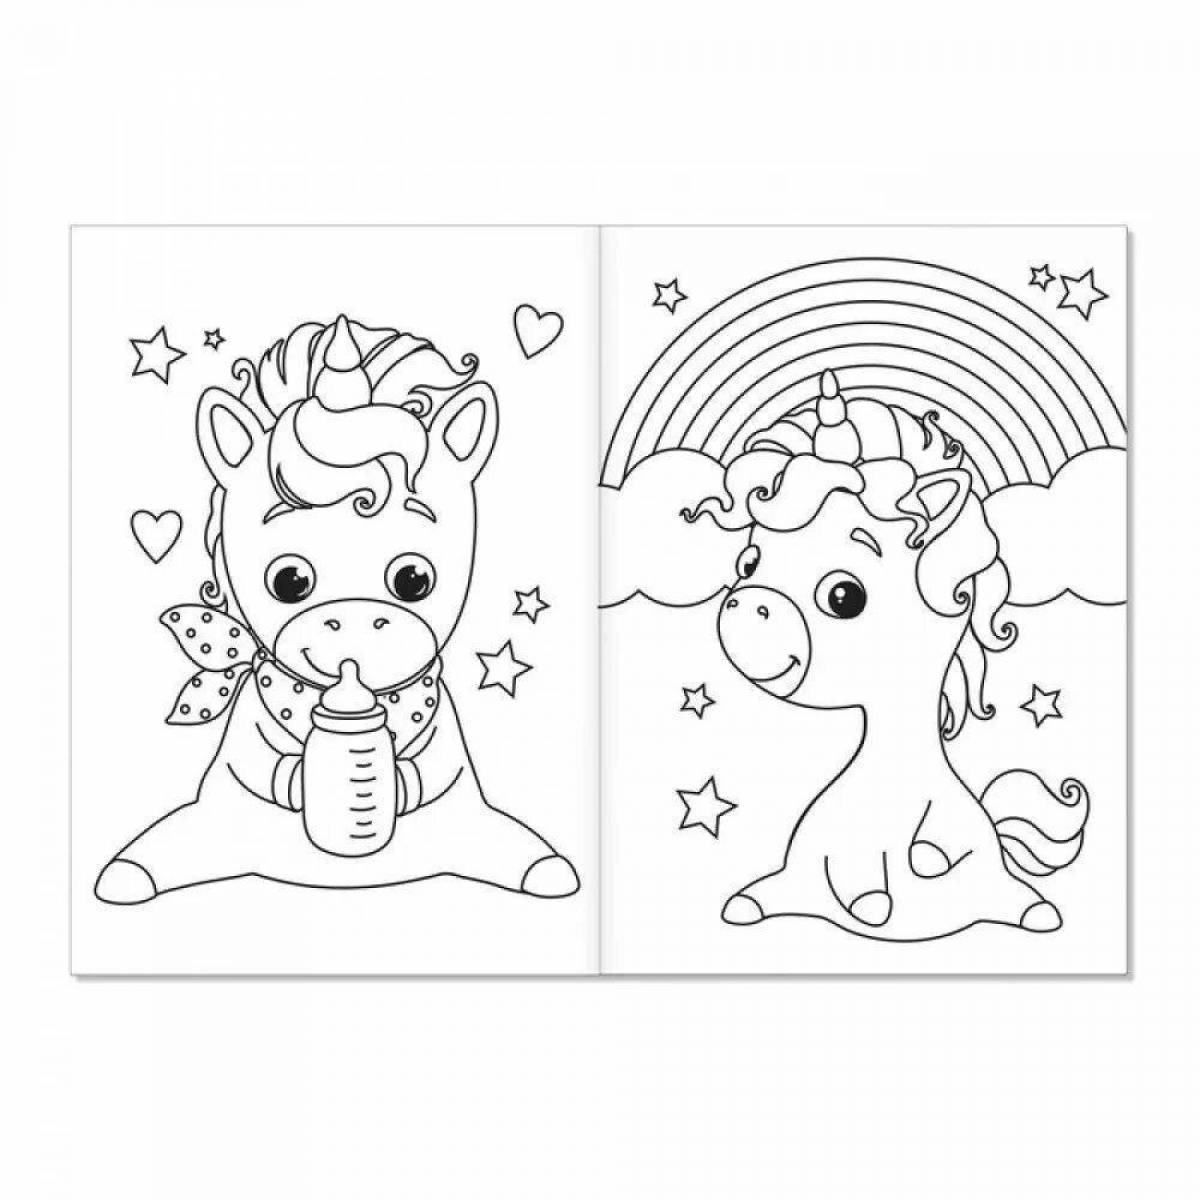 Charming coloring book on 1 sheet 2